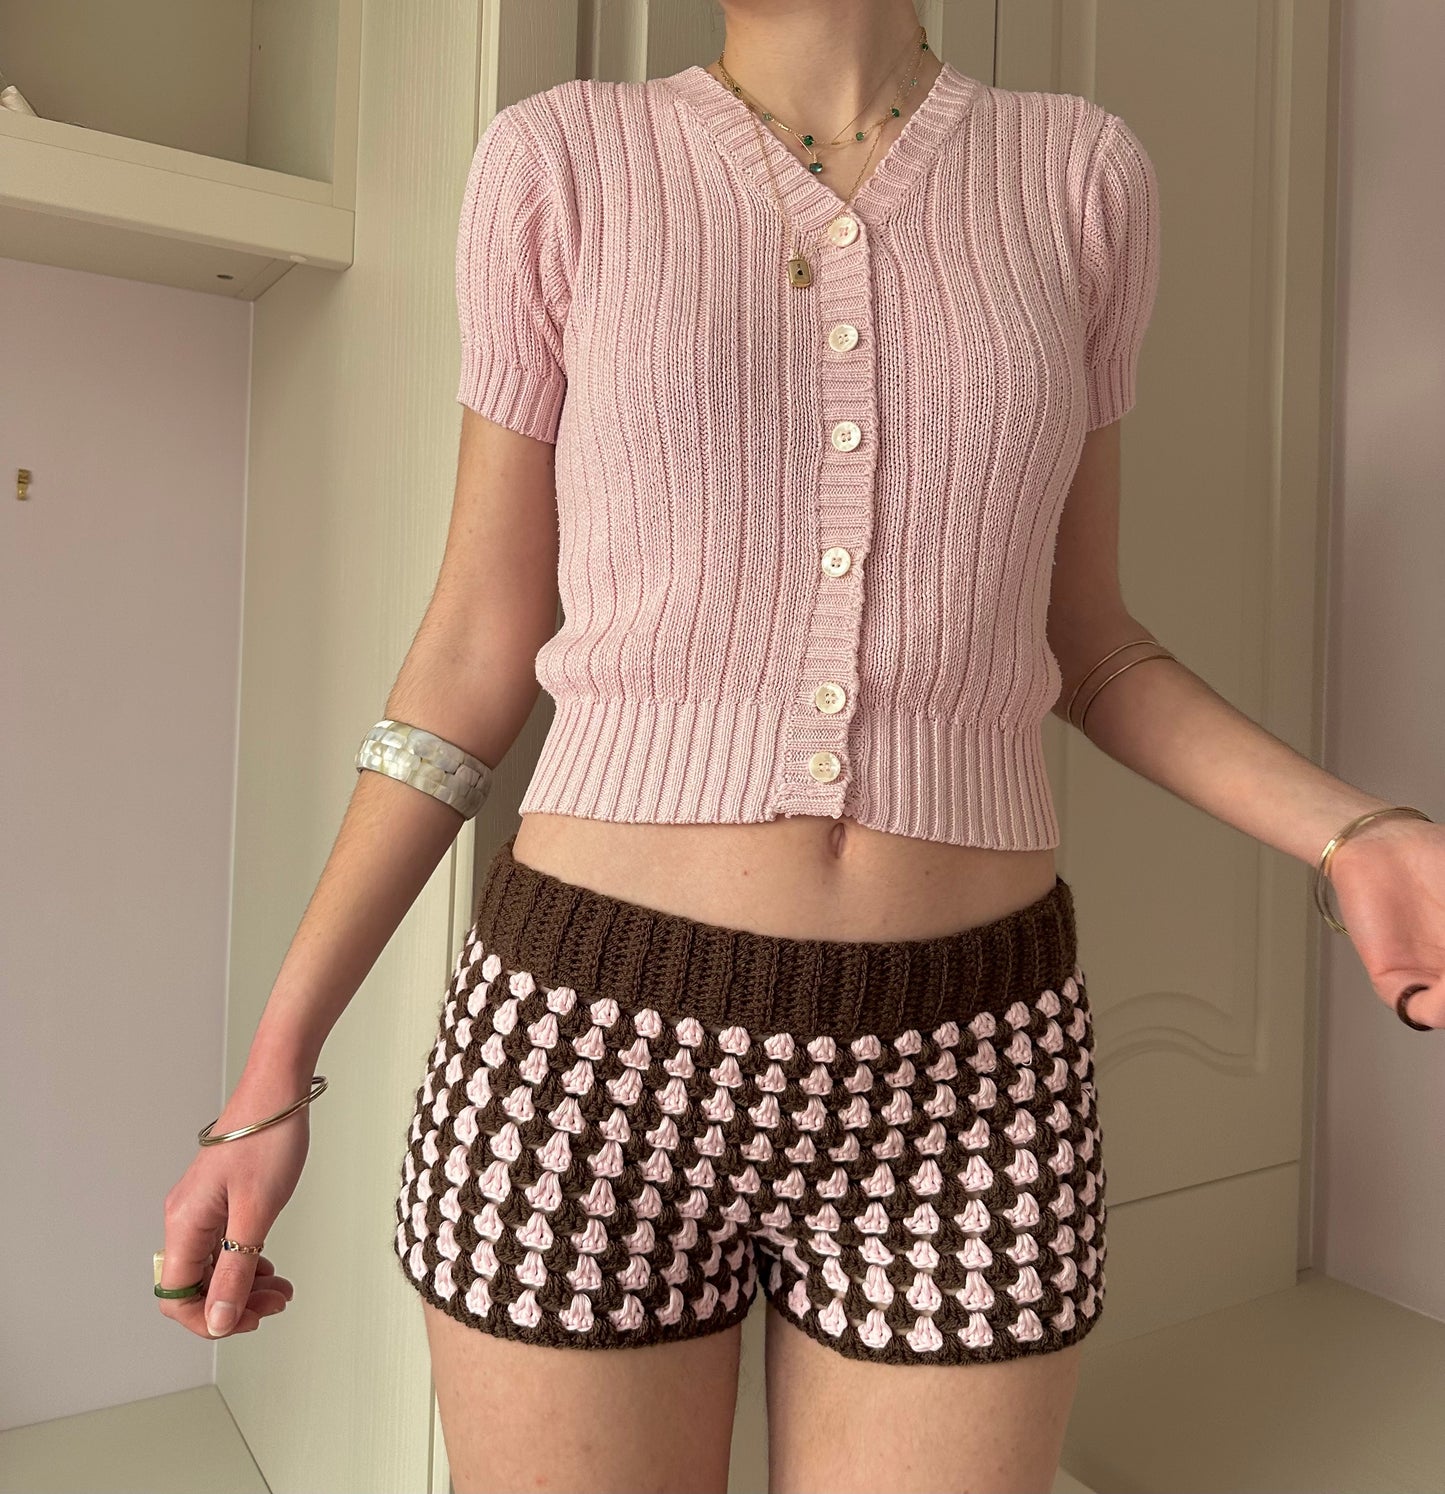 Handmade gingham crochet shorts in brown and pink